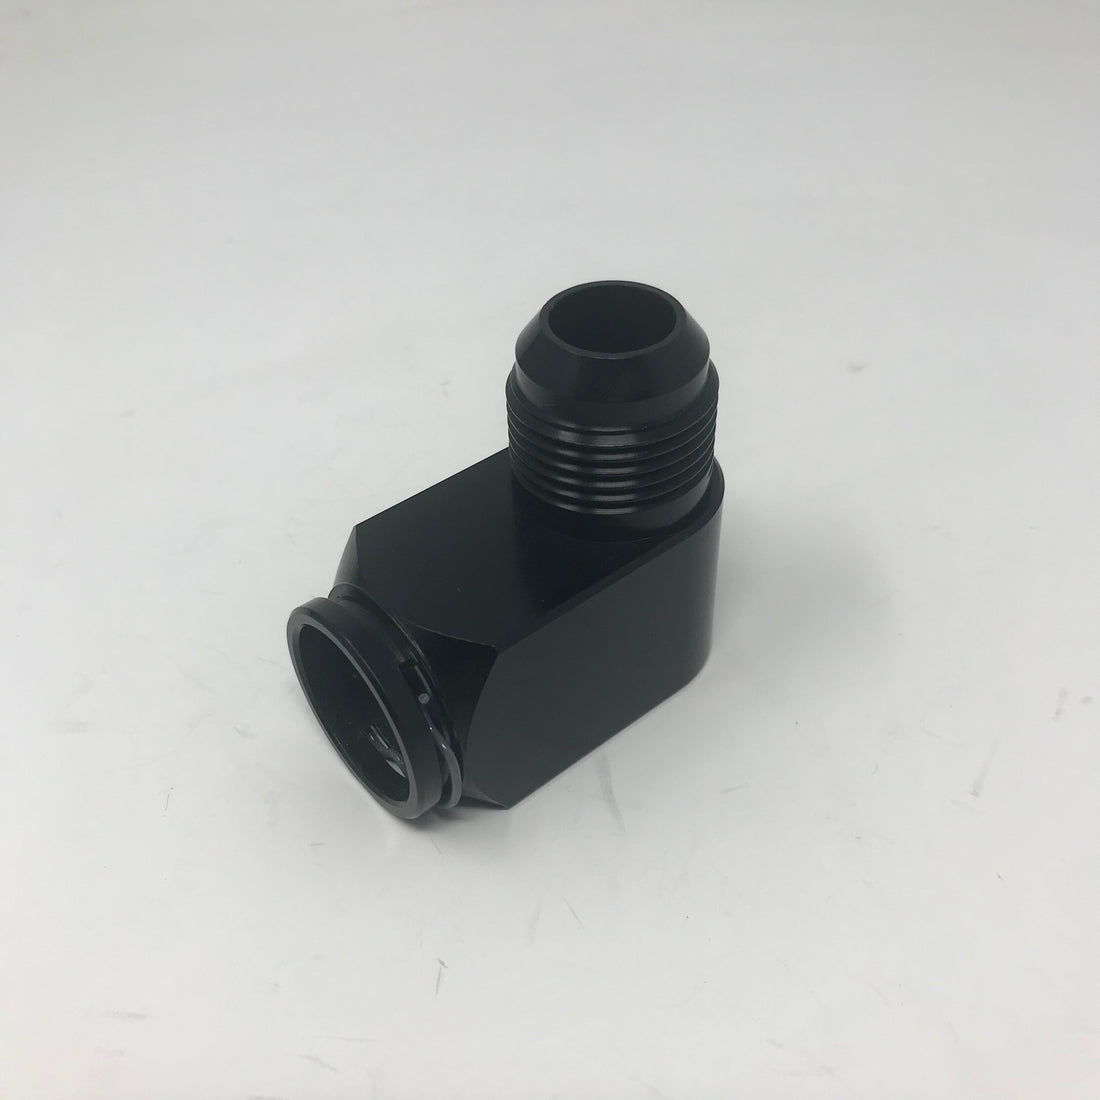 90 Degree -12AN Male to 3/4 Female GM Quick Connect Fitting